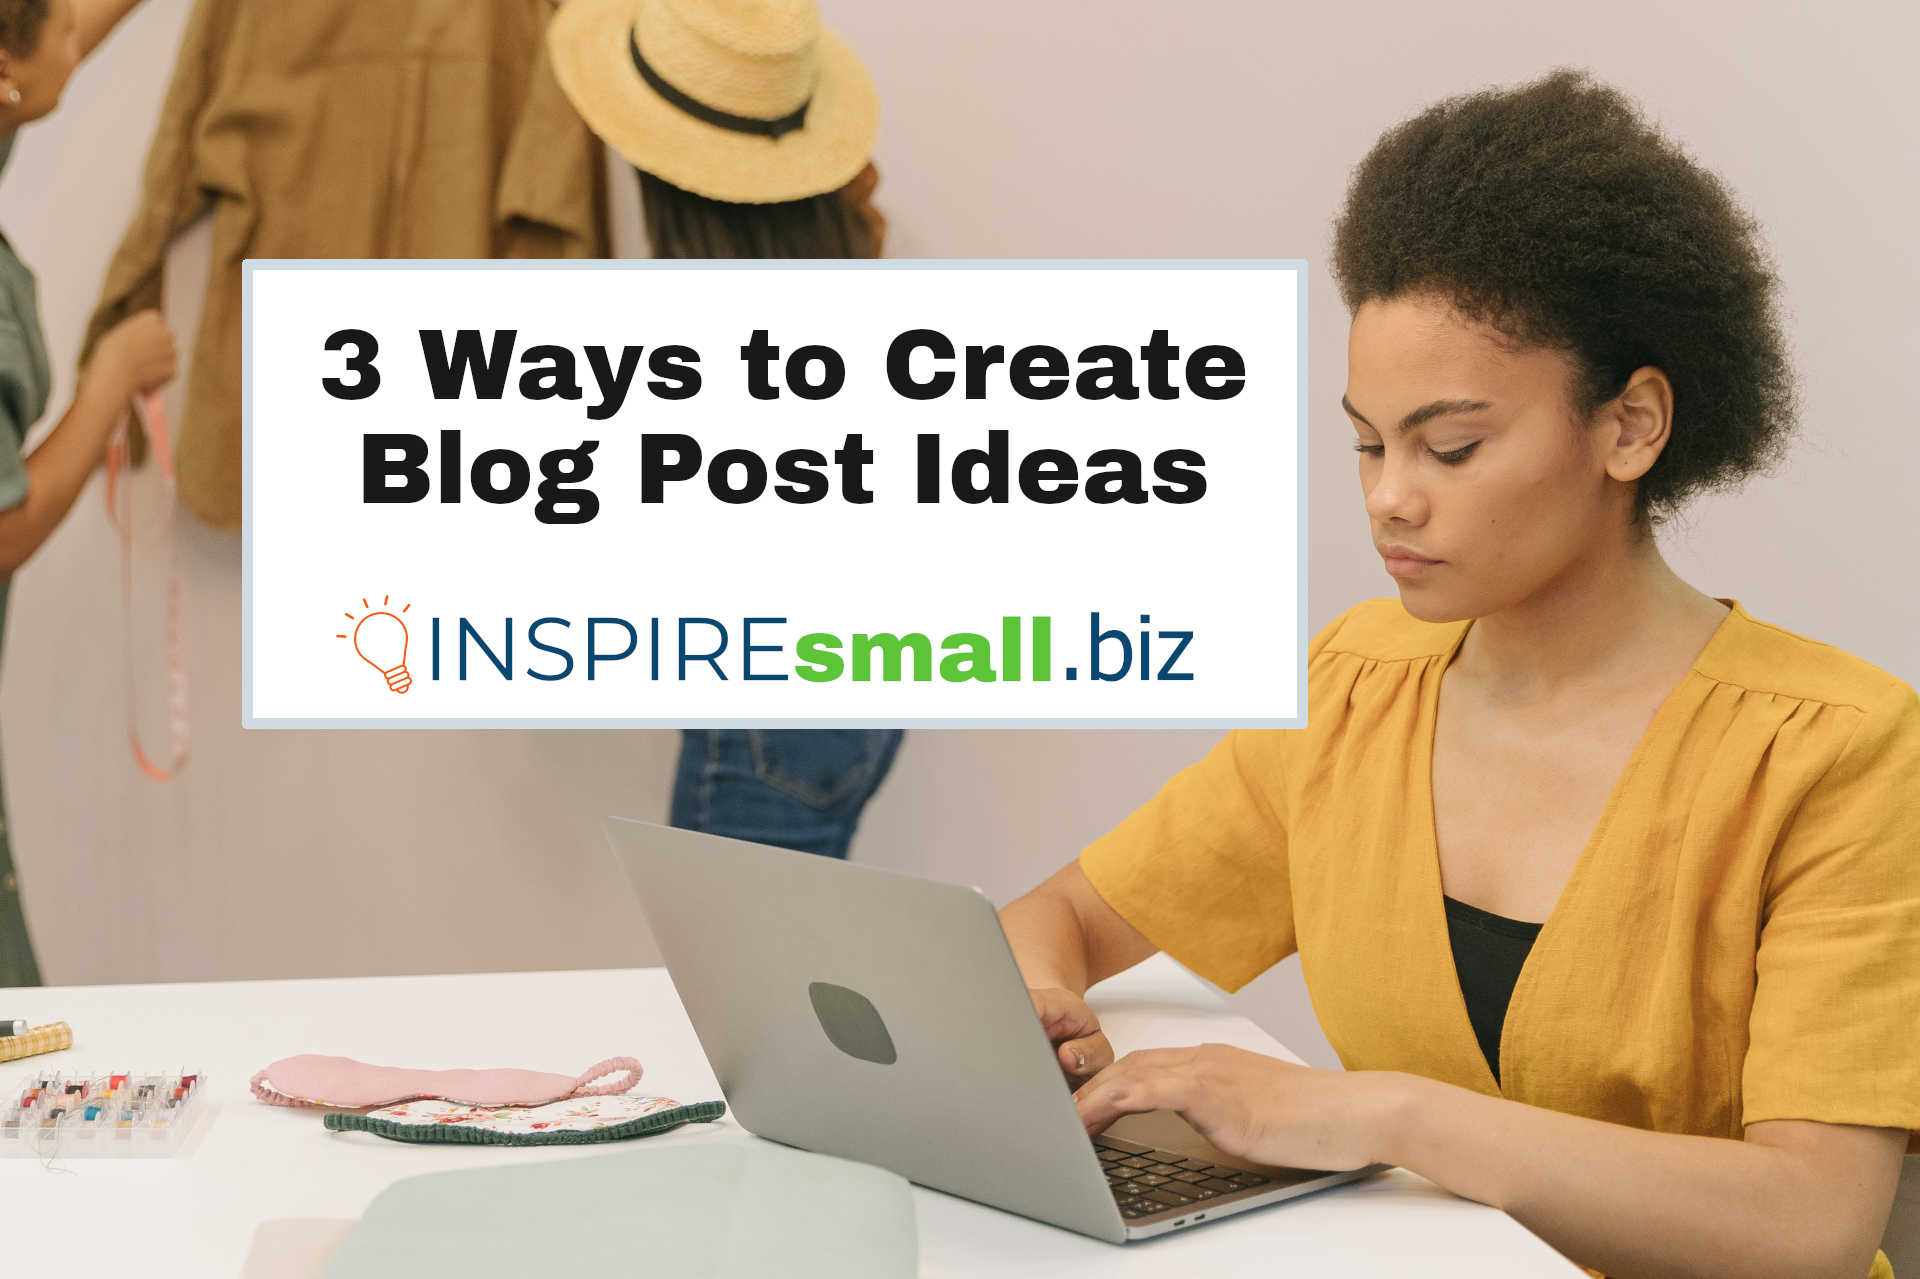 3 Ways to Create Blog Post Ideas from INSPIREsmall.biz on a white background, inset in a picture of a person working at an Apple laptop while sitting at a white table, surrounded by samples and products. There are 2 people in the background looking at a coat.